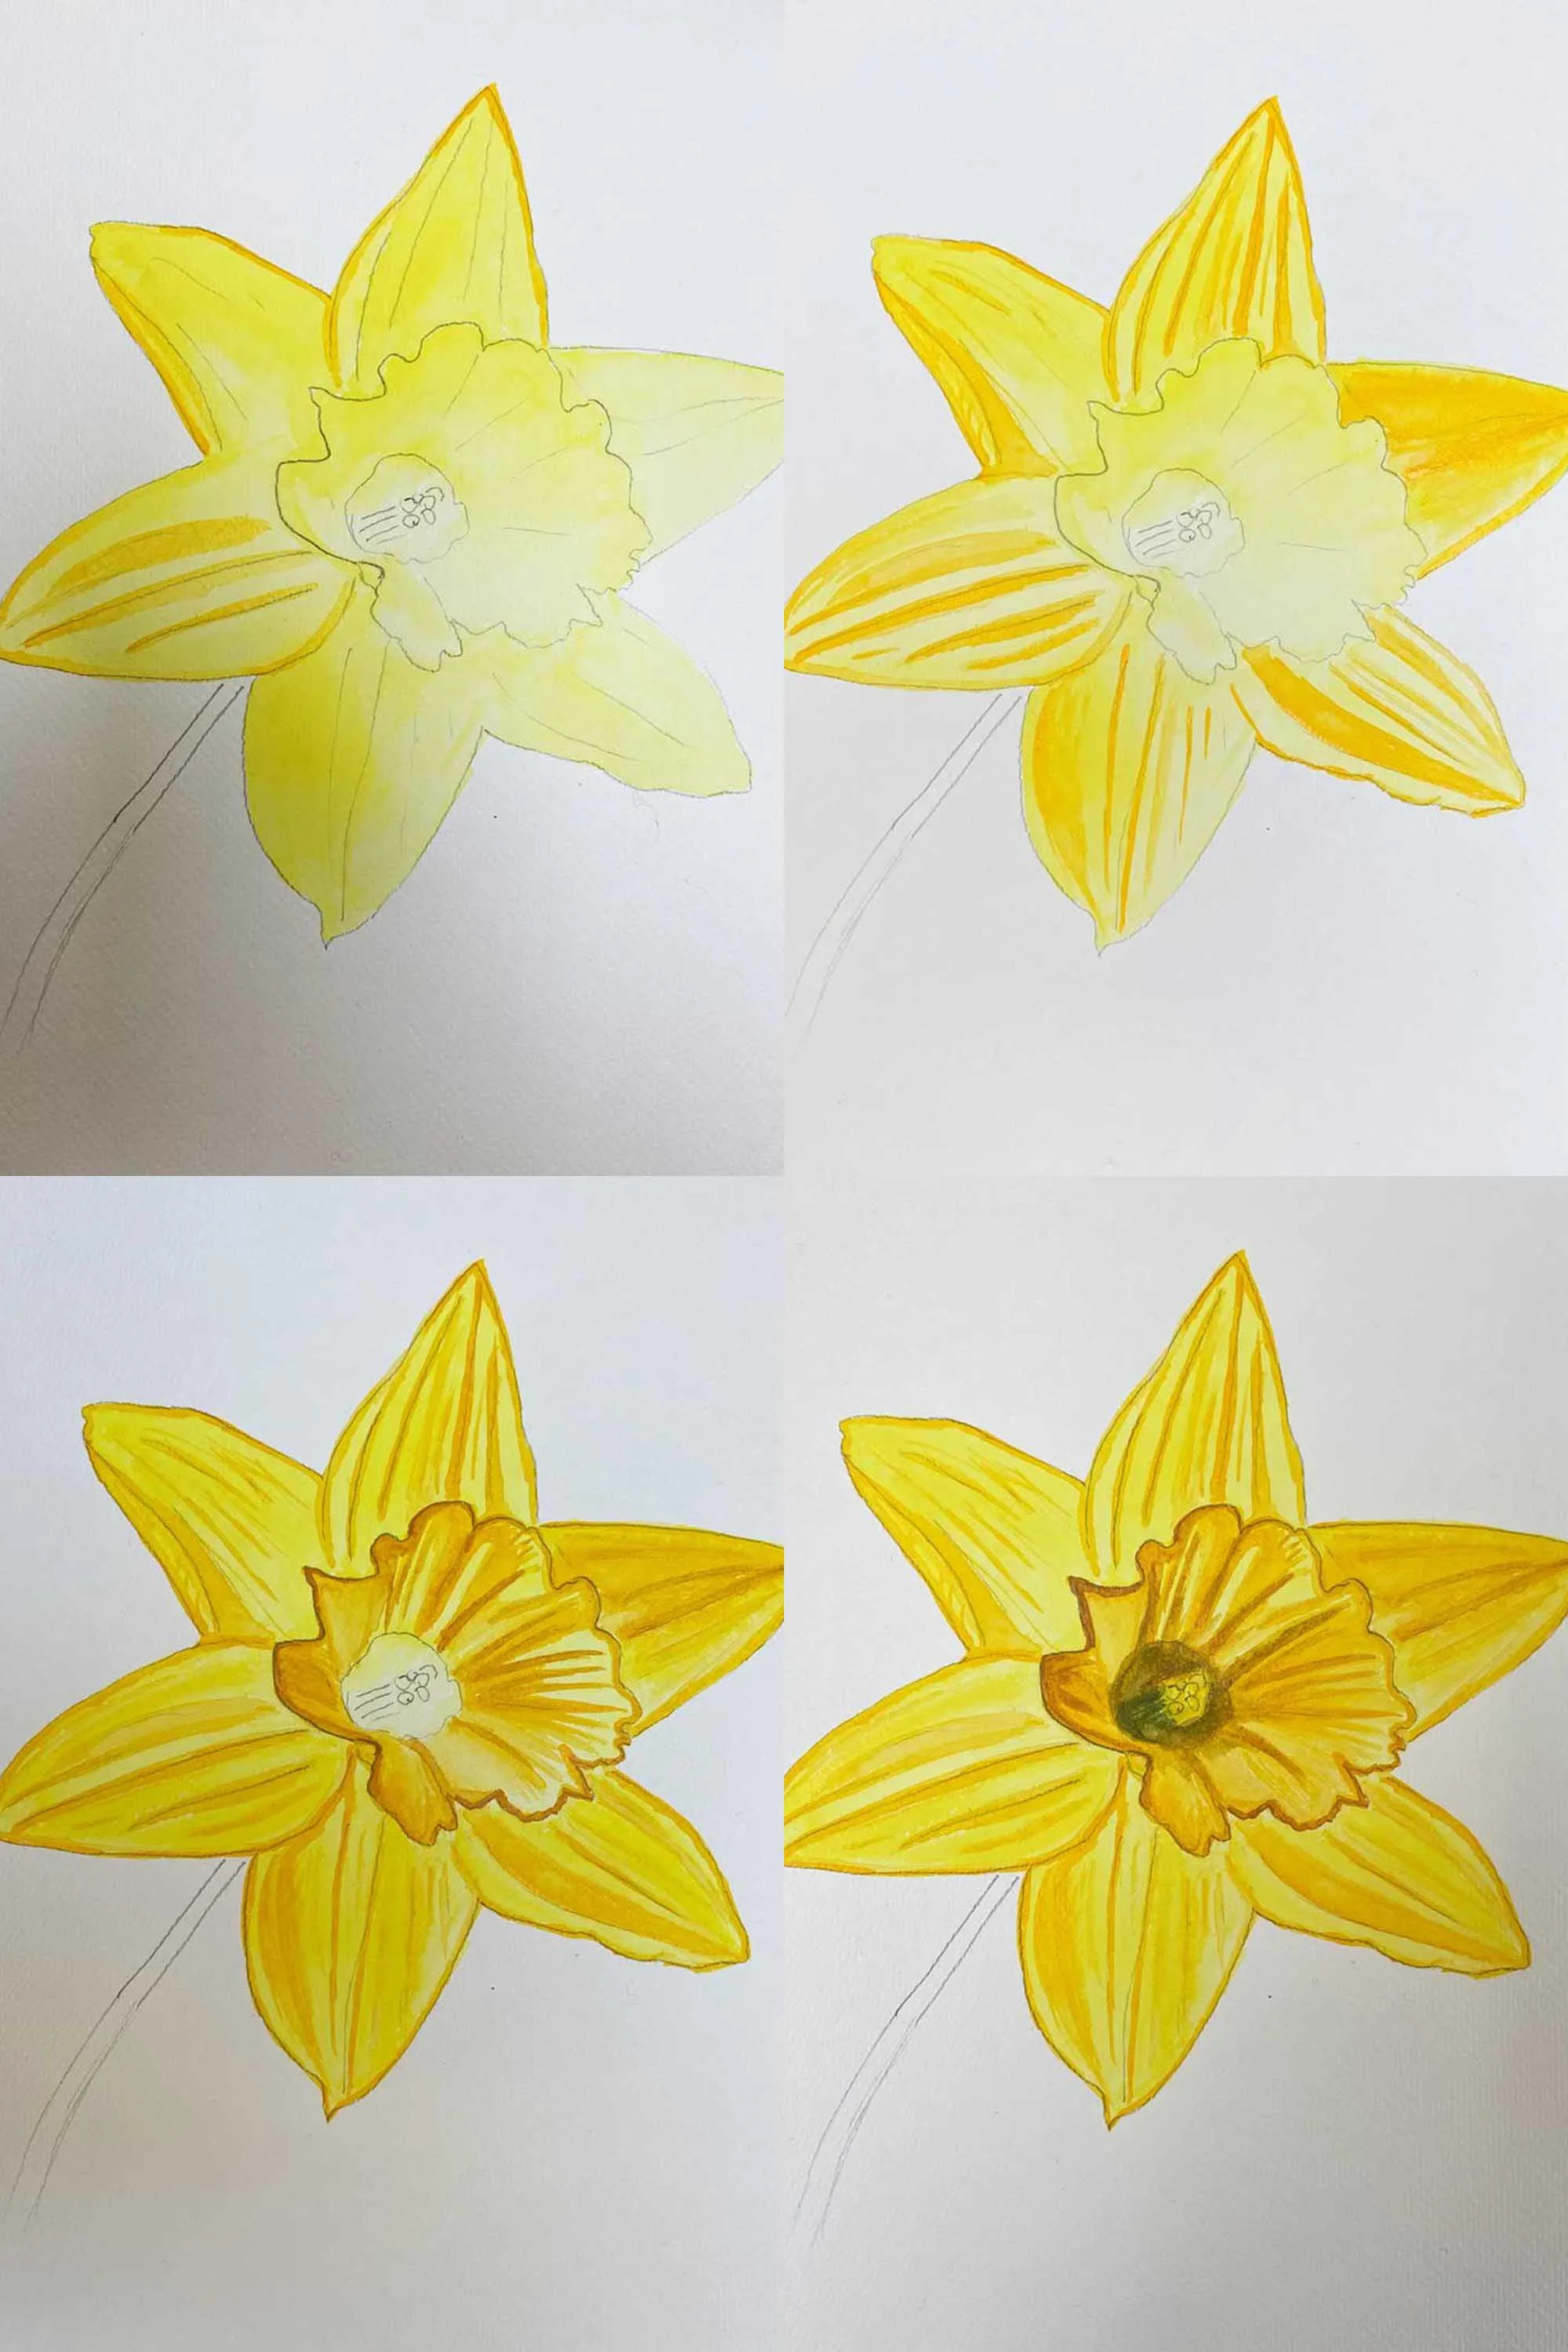 painting a daffodil flower step by step with watercolour paing